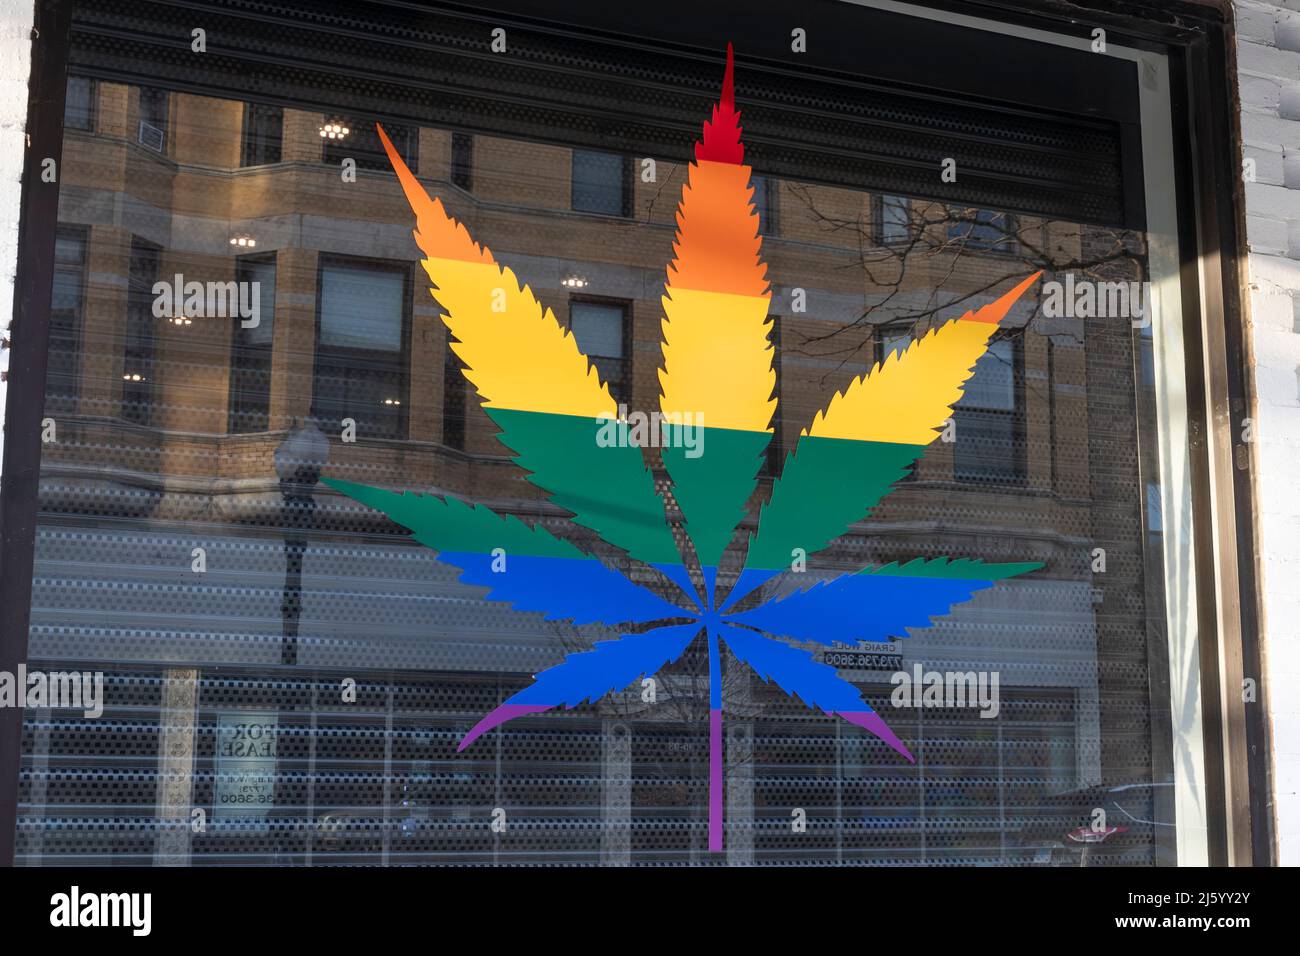 Chicago - Circa April 2022: Legal Weed and cannabis dispensary. In 2020, recreational pot and marijuana were legalized in Illinois. Stock Photo